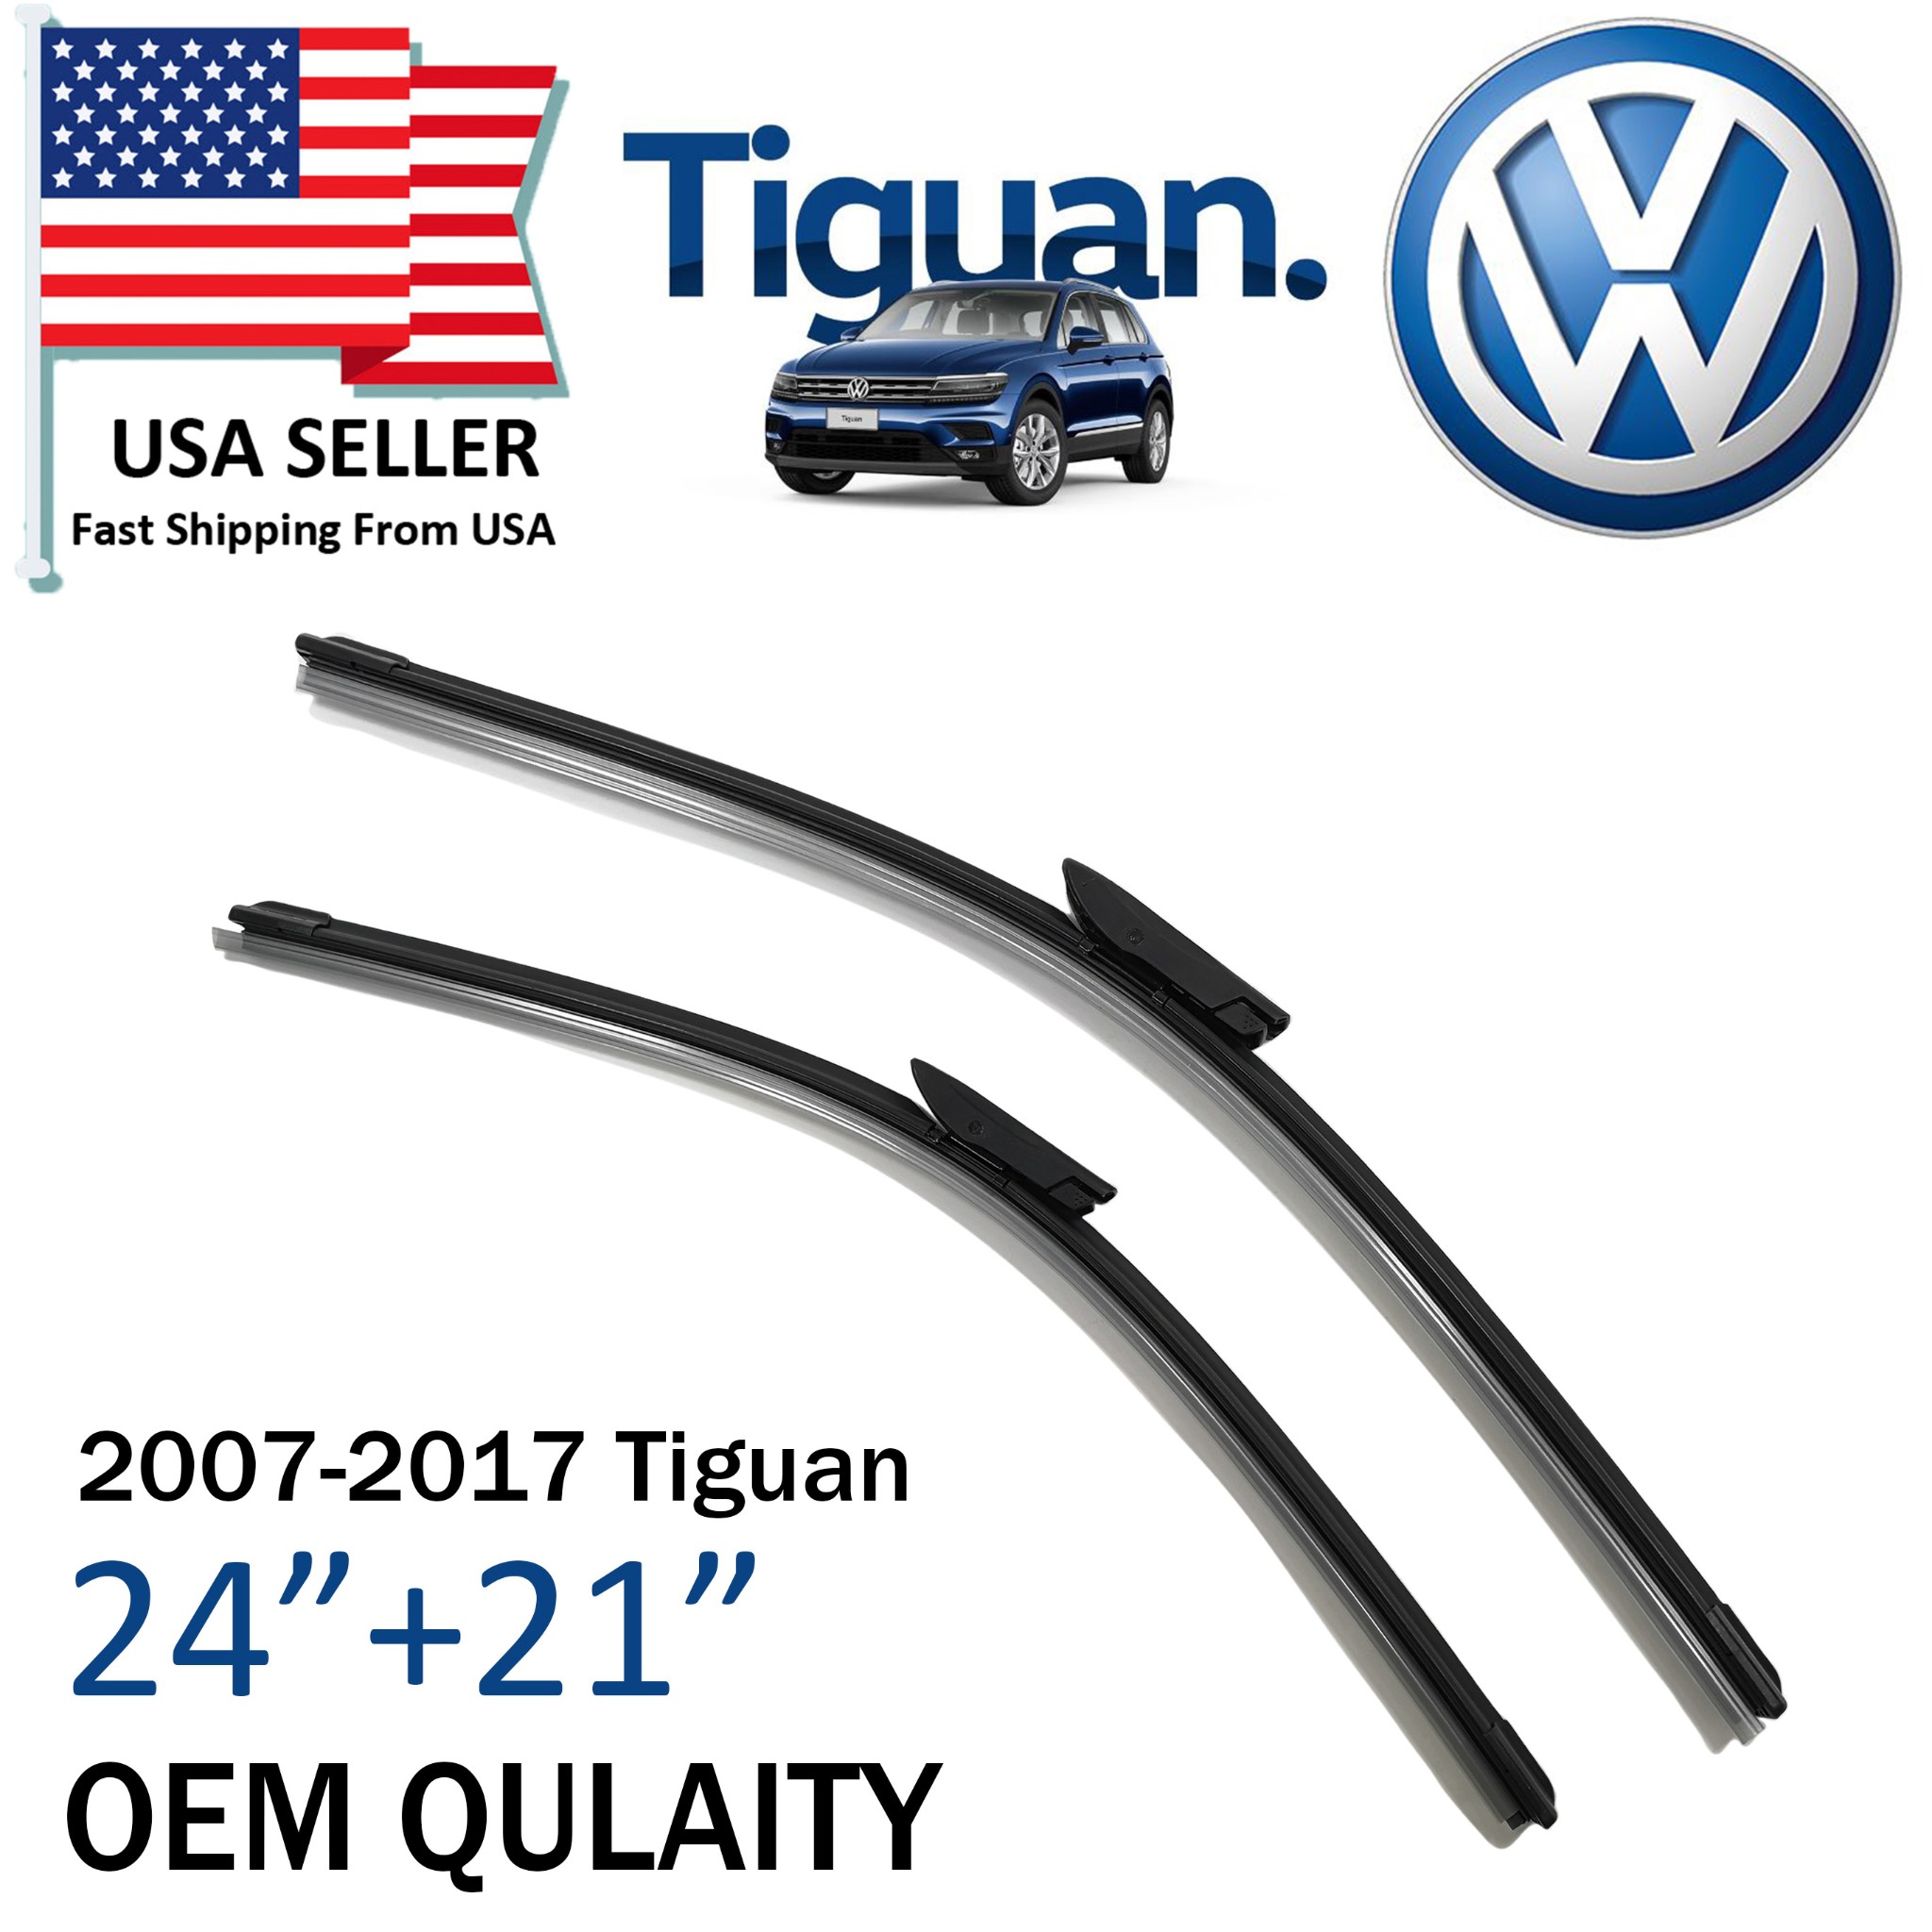 NeW Great OEM Quality 24"+ 21" Wiper Blades for 2007-2017 For Volkswagen Tiguan | eBay What Size Wiper Blades For 2018 Chevy Malibu